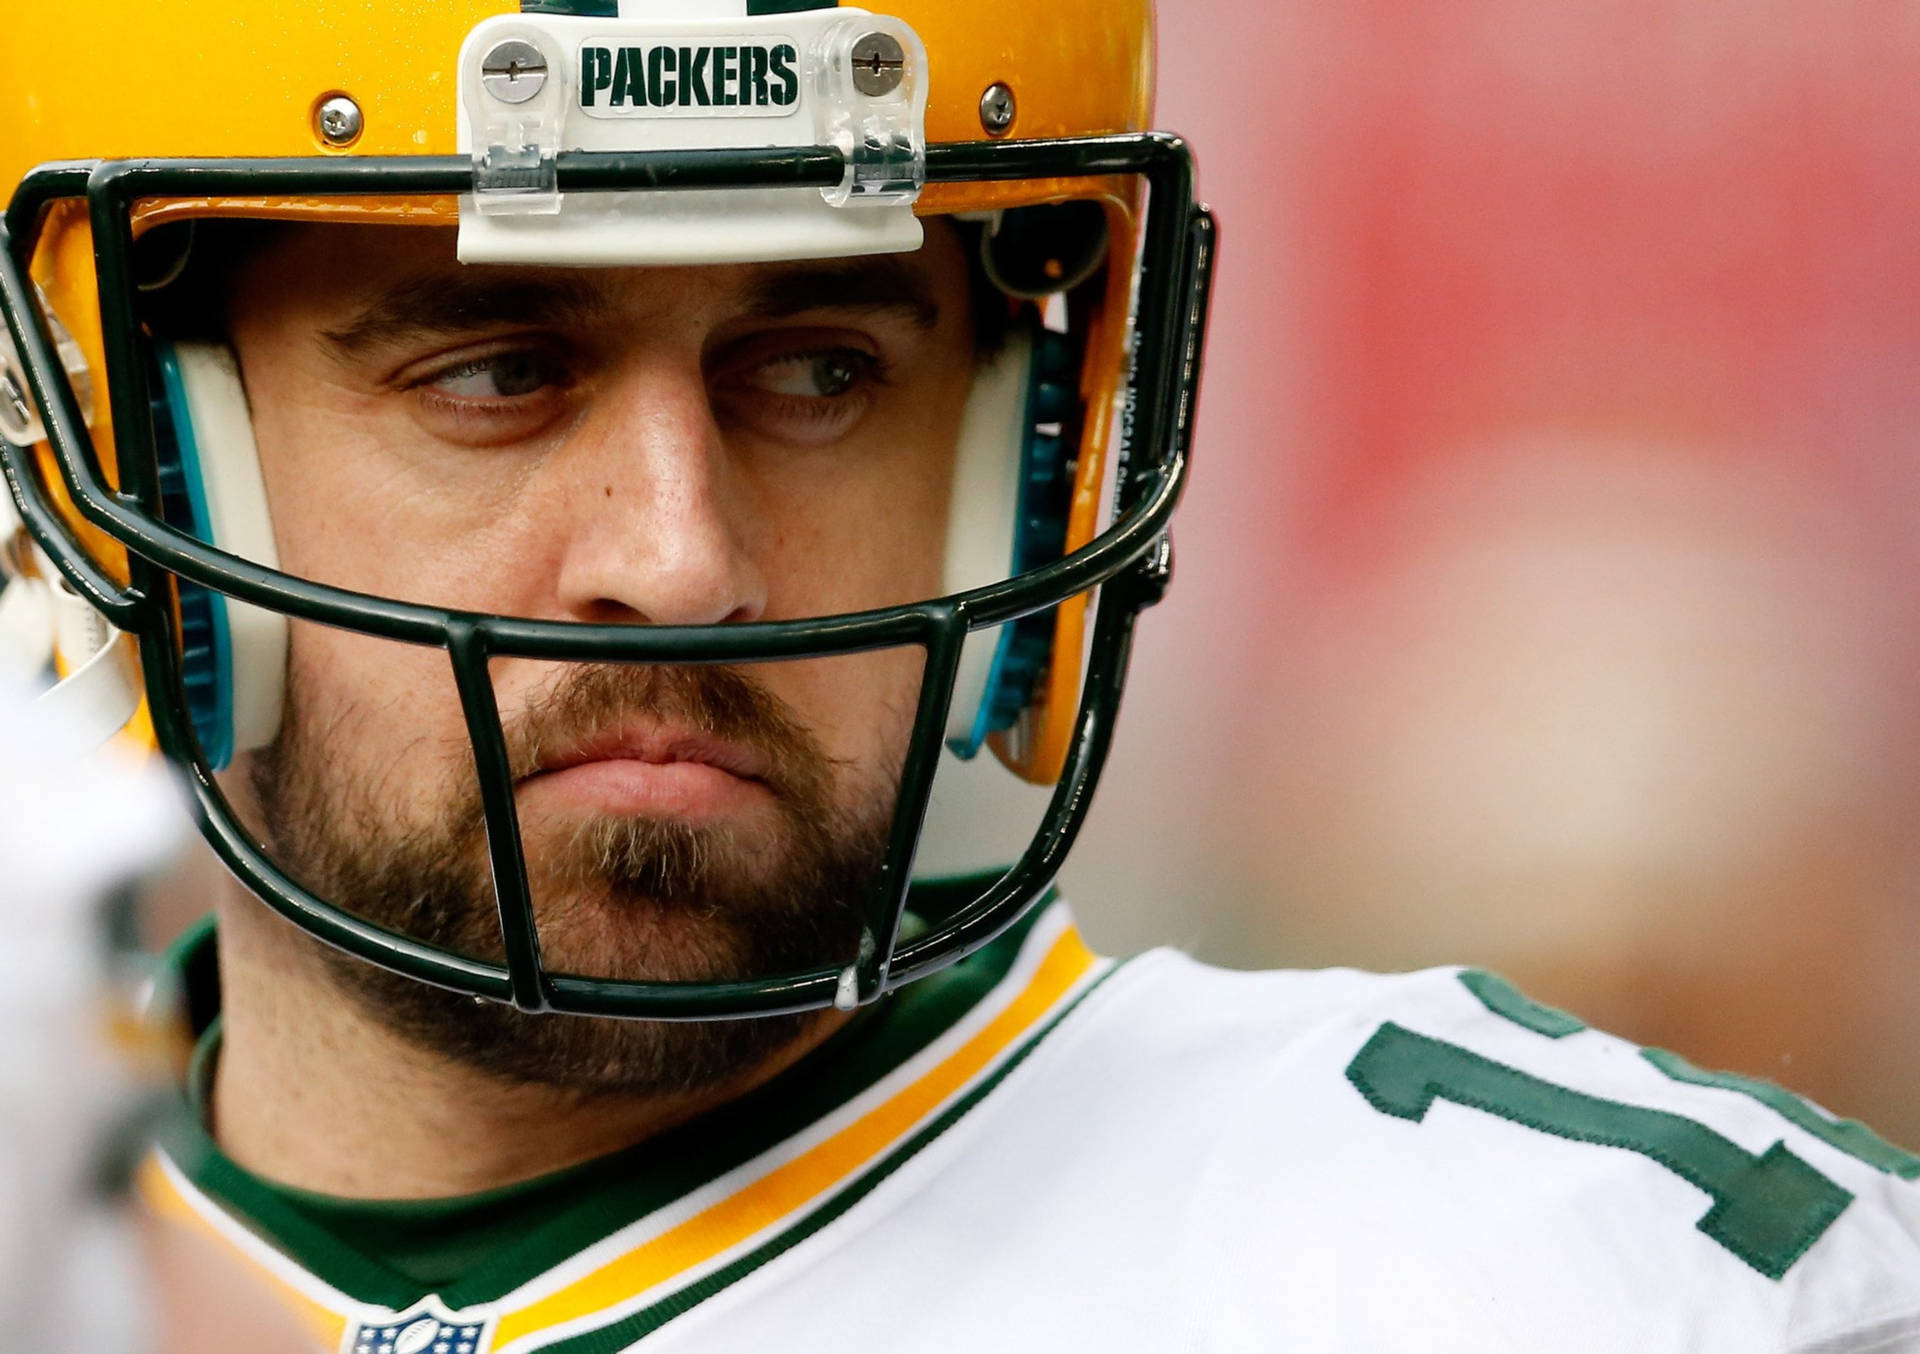 Aaron Rodgers Packers Close-up Background